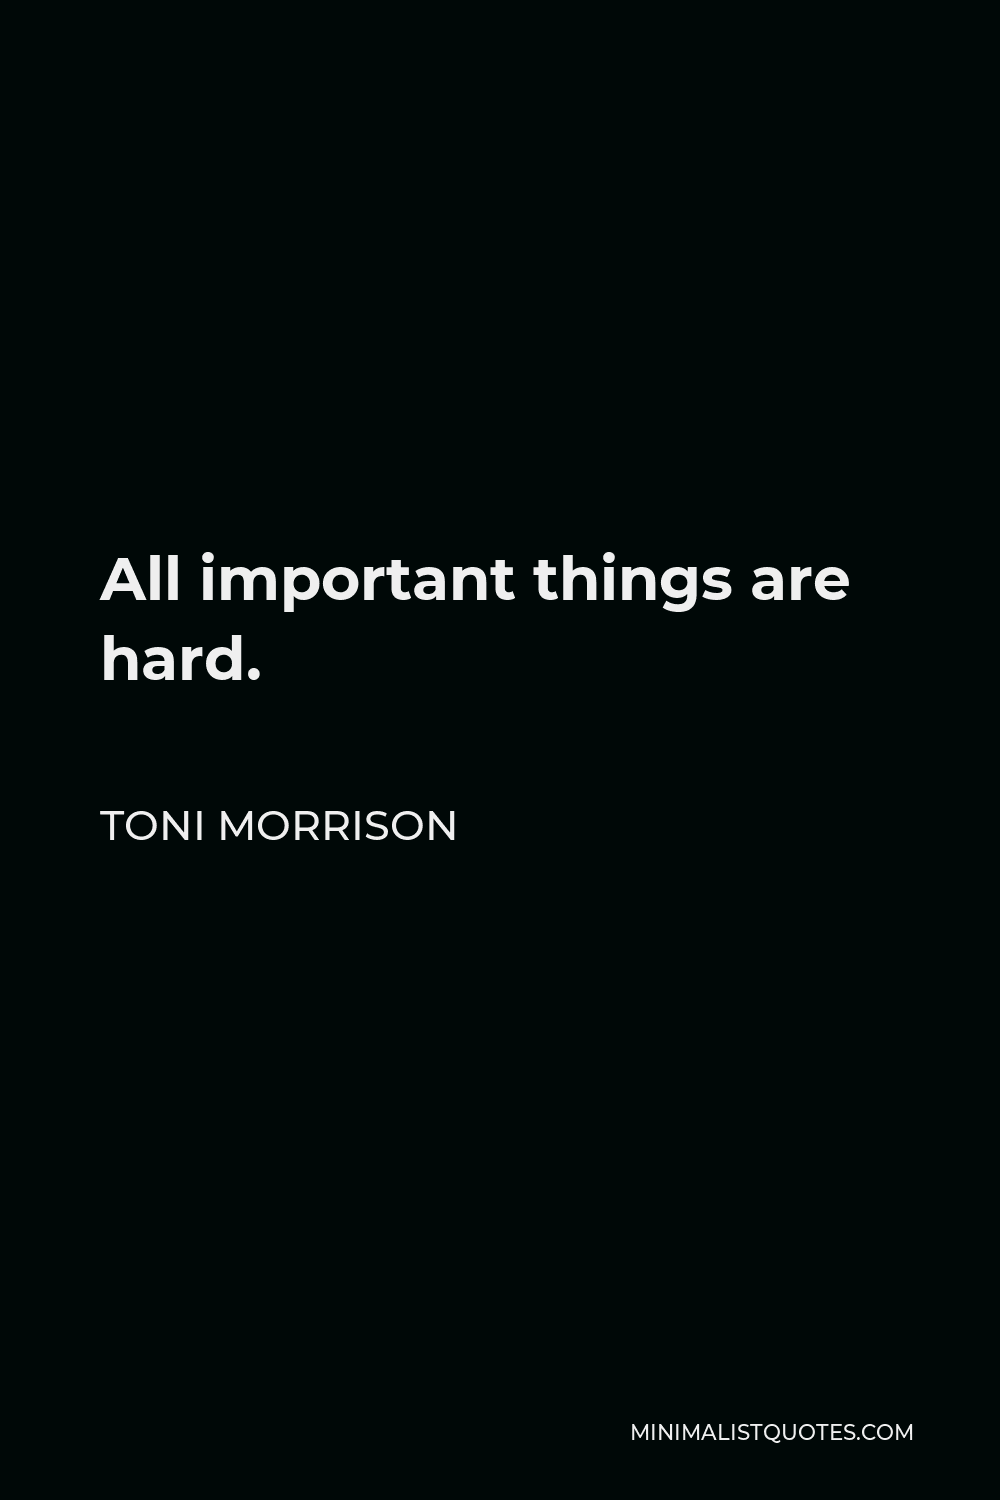 Toni Morrison Quote - All important things are hard.